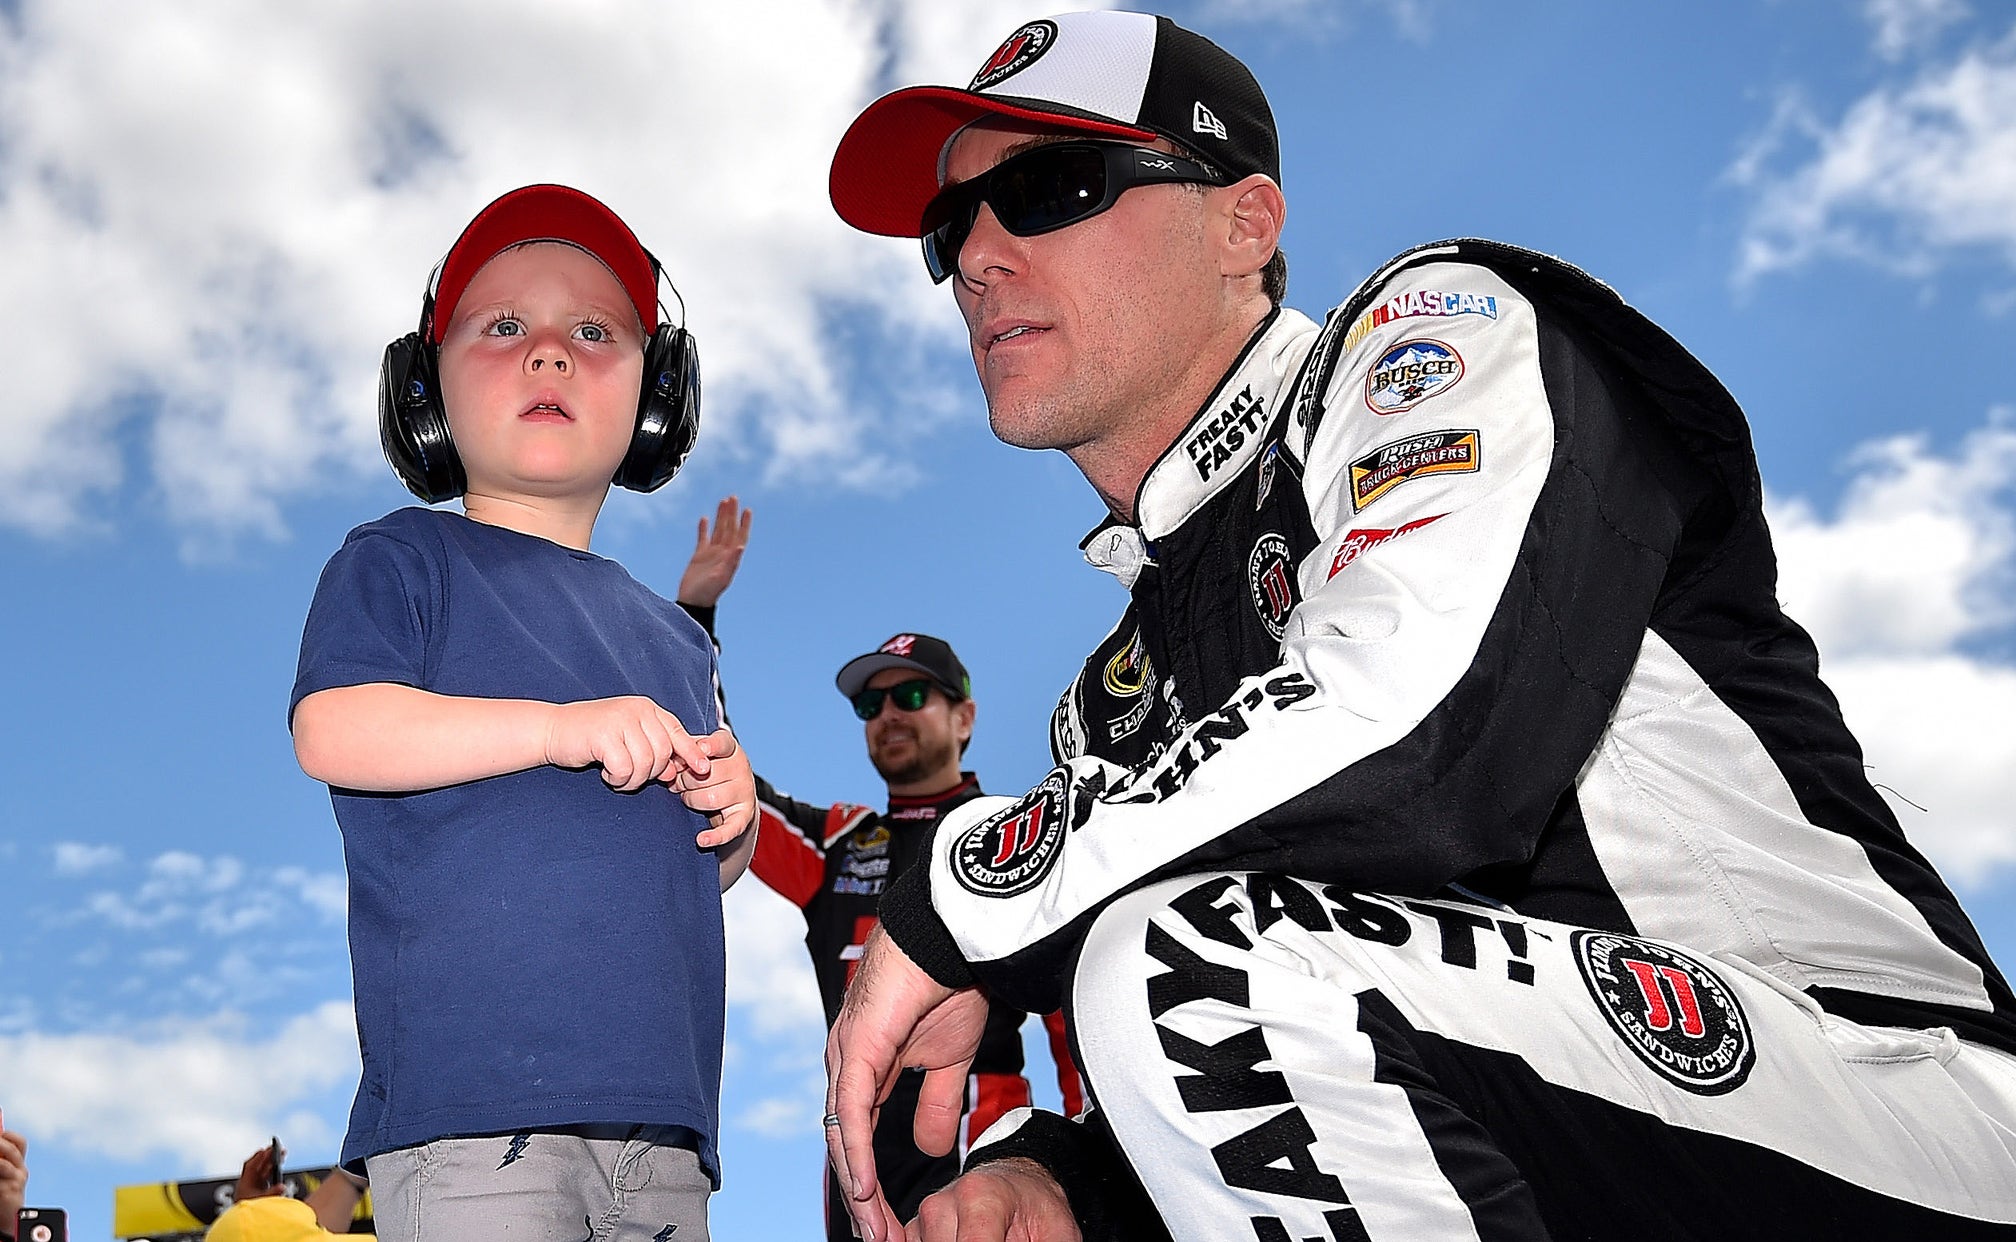 Kevin Harvick's 3-year-old son, Keelan, gets behind the wheel | FOX Sports